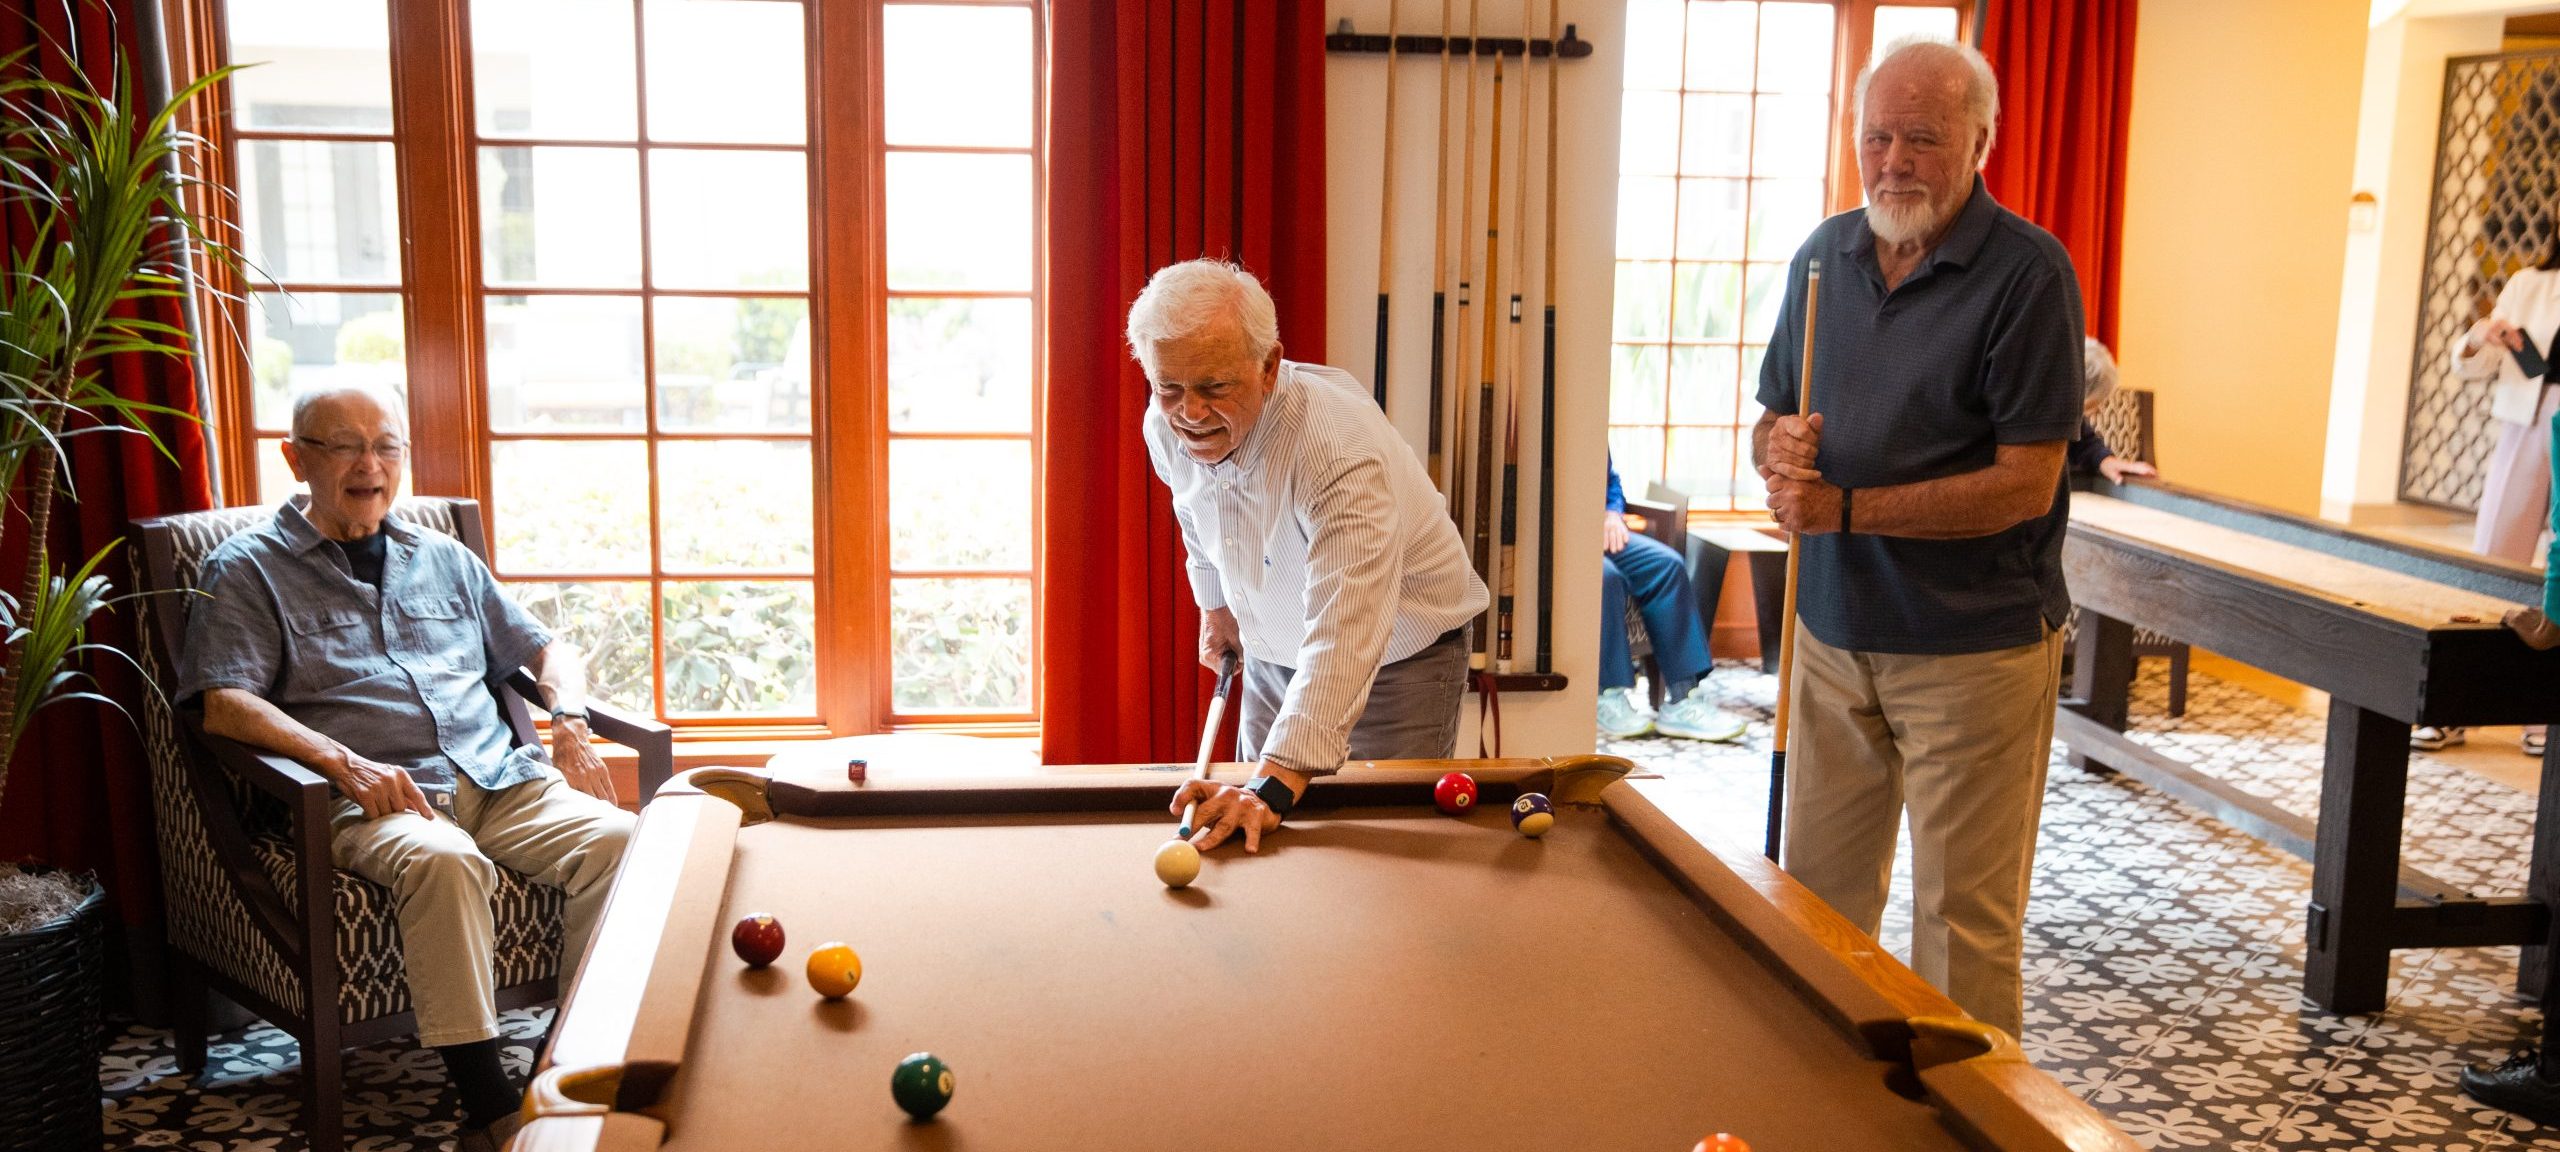 three elderly men playing pool together in game room